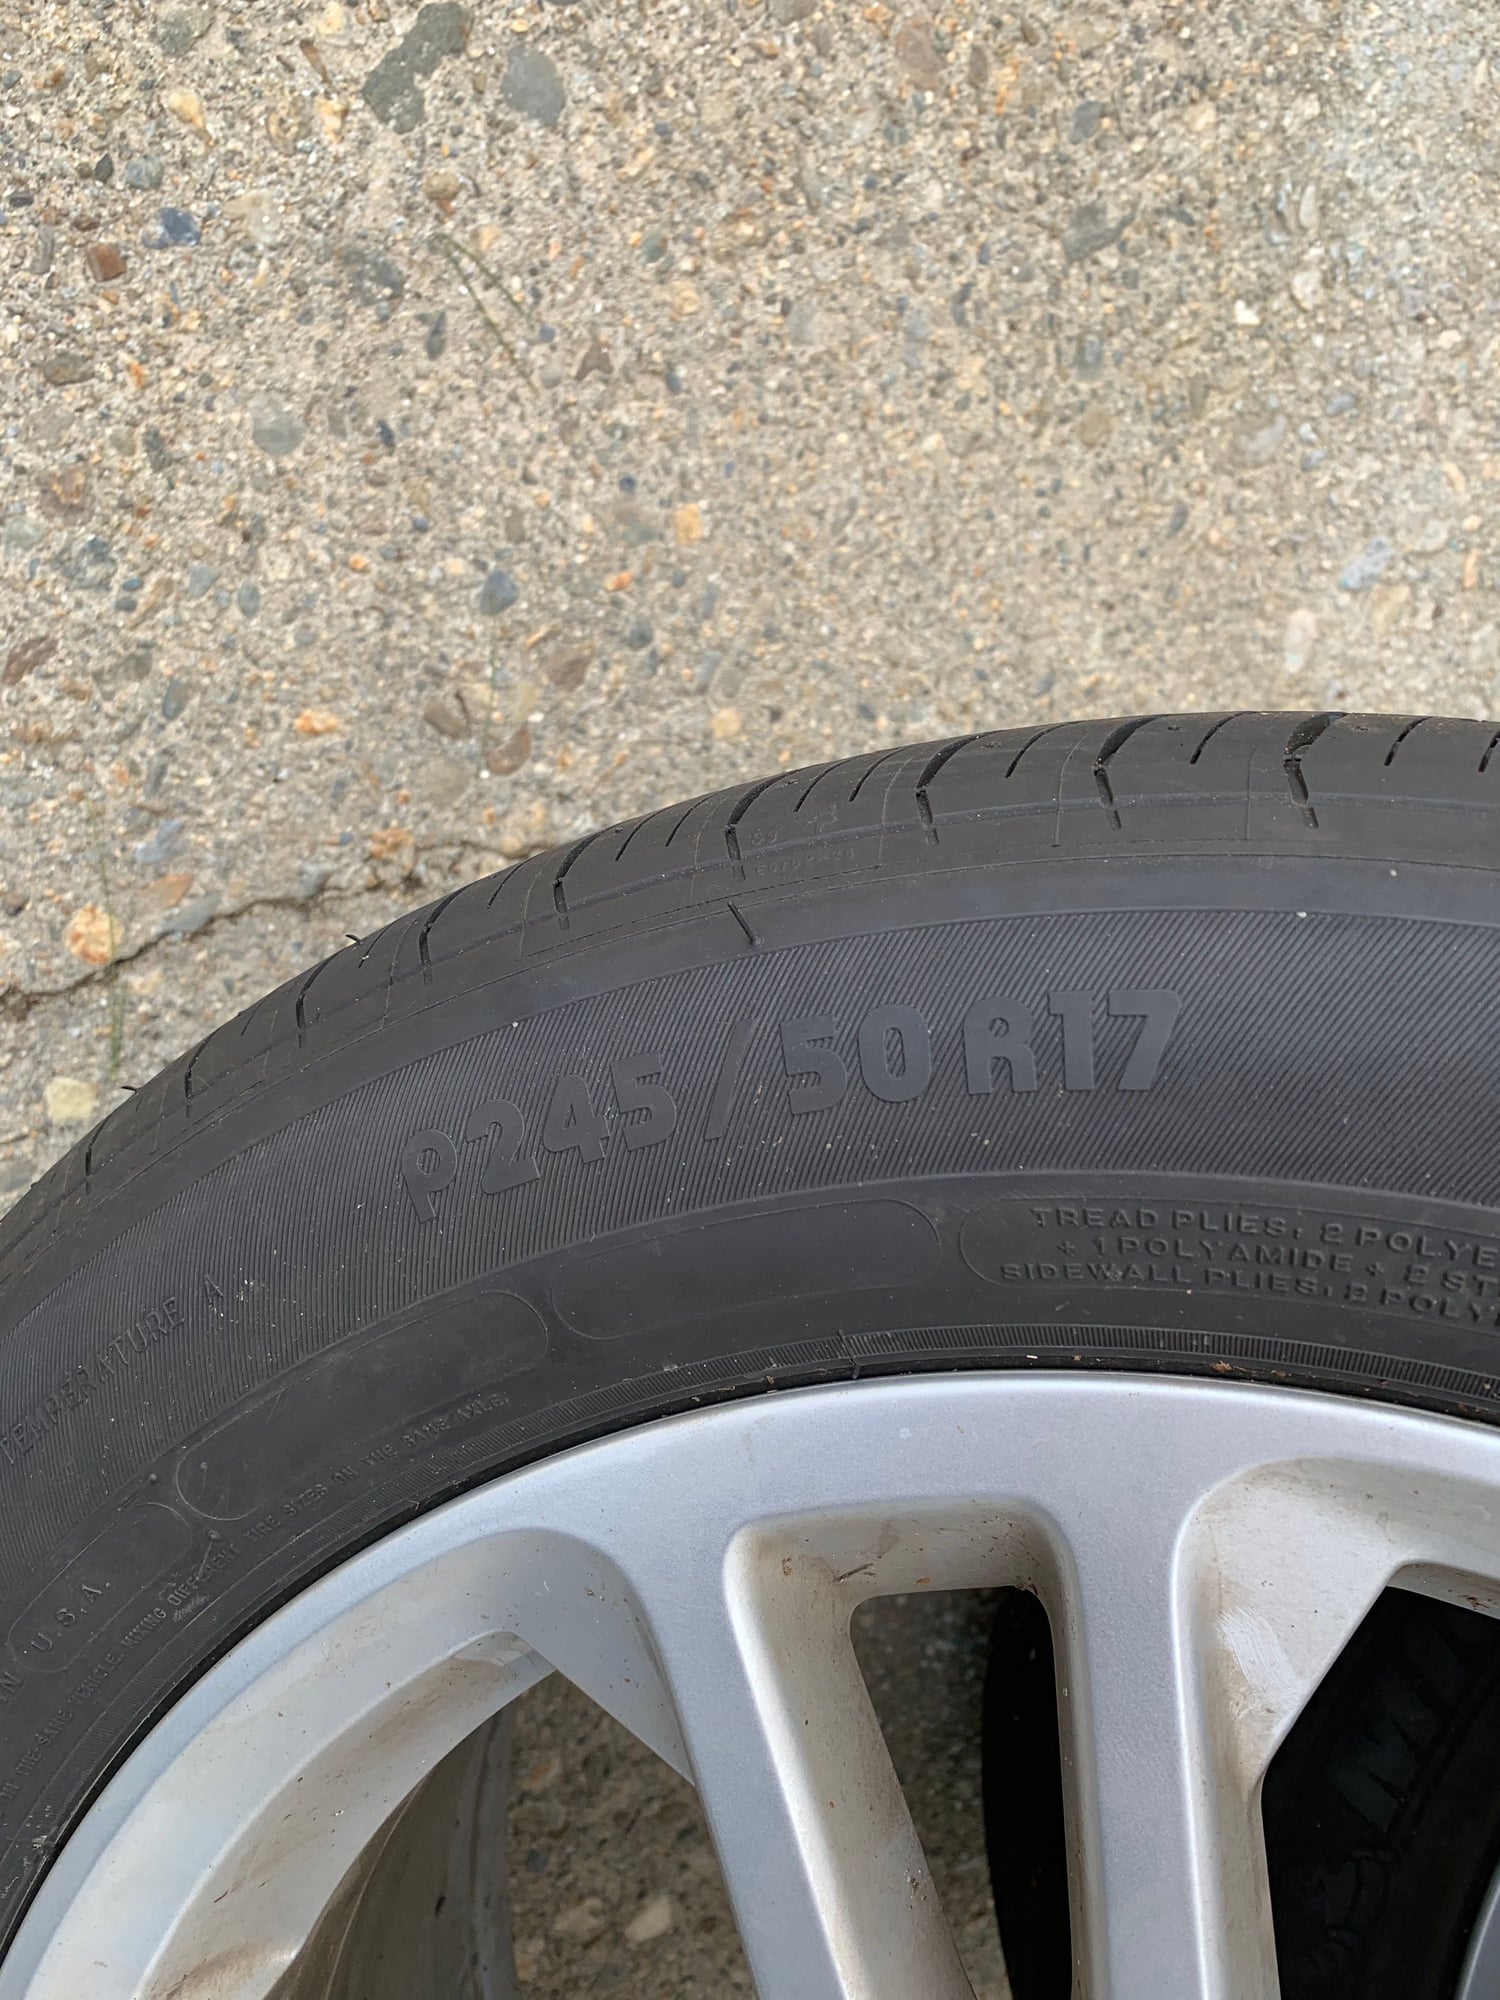 Wheels and Tires/Axles - FS: Two (2) 2010 Tl wheels & Michelin tires 5X120 - Used - 2010 Acura TL - Southbridge, MA 01550, United States